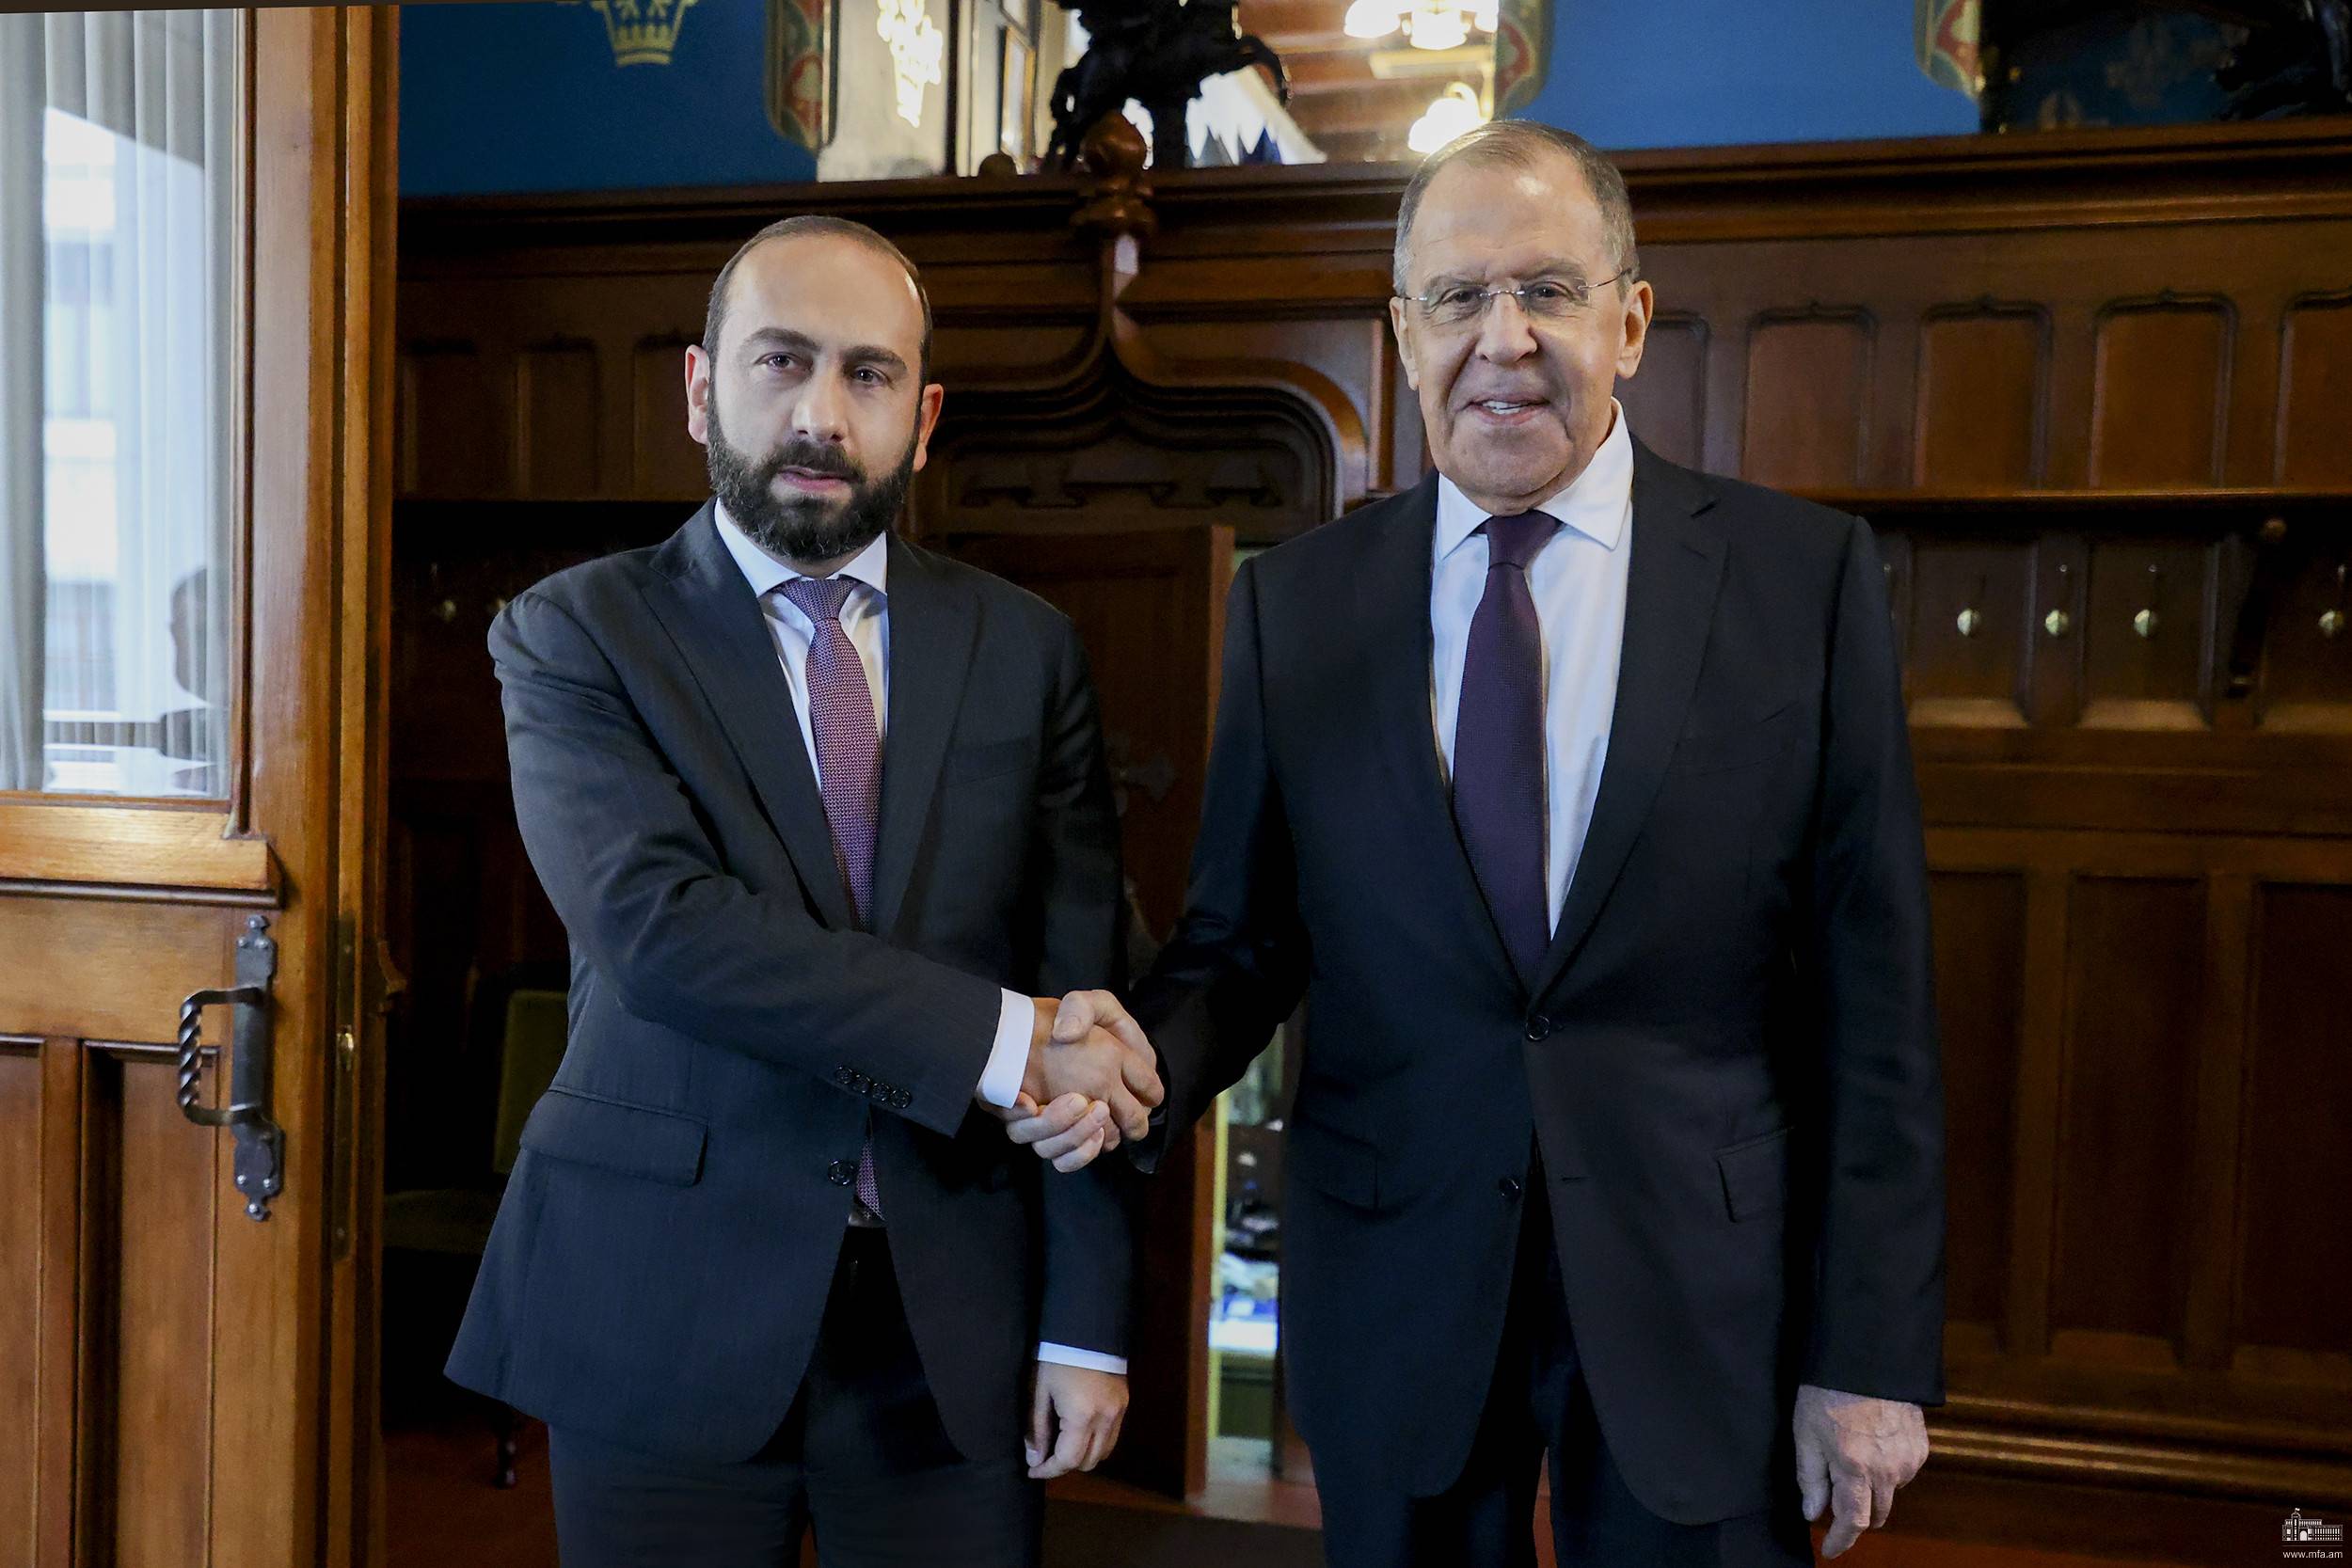 Mirzoyan stressed in meeting with Lavrov commitment to take 1975 map as basis for ensuring maximum clarity in further border delimitation process